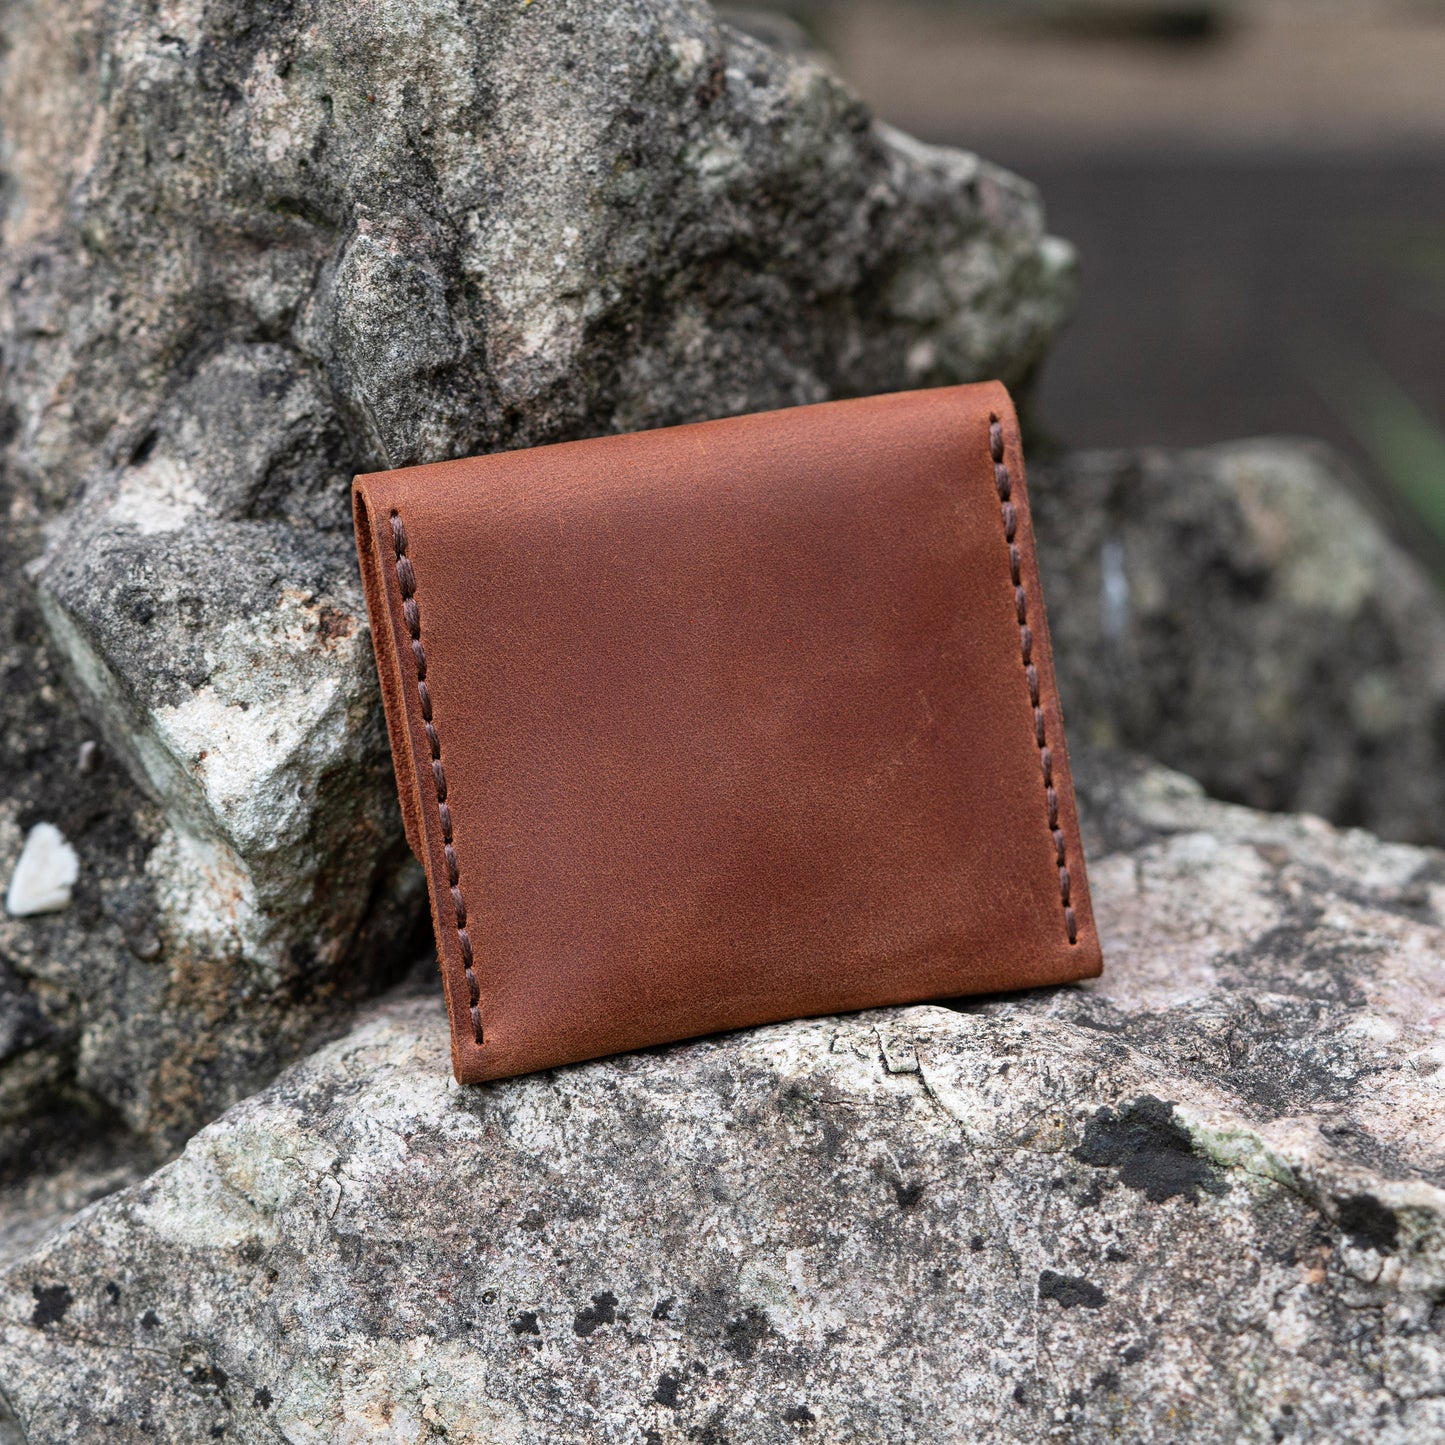 Leather Coin Purse- Hand Stitched |Coin Bag, Minimalist Wallet, Earphone Holder, Jewelery Pouch